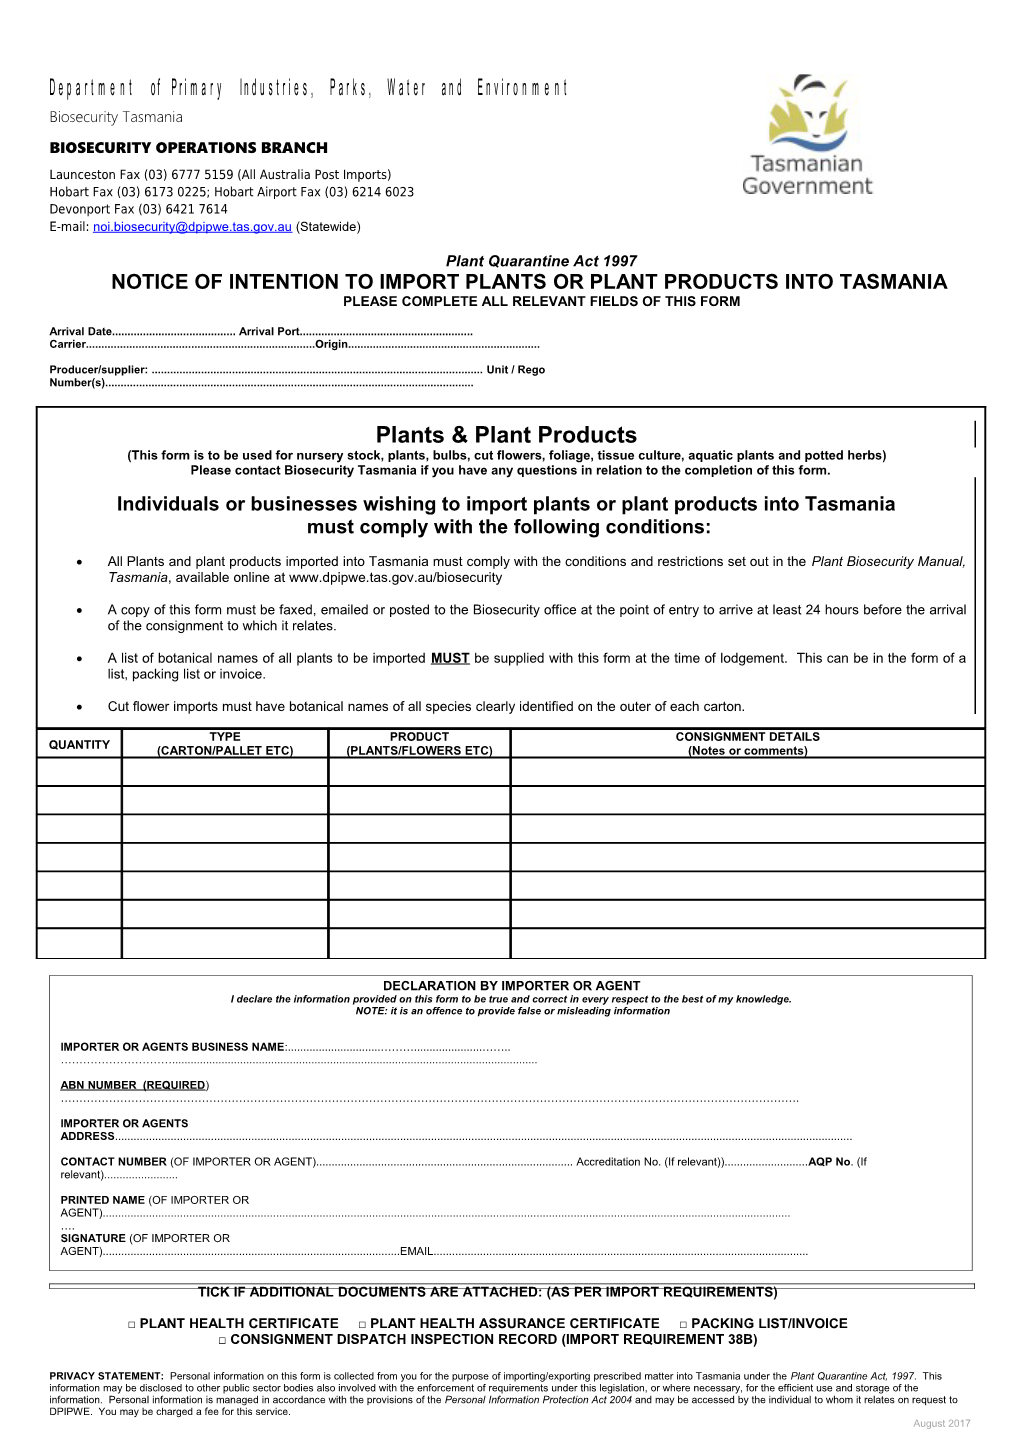 Notice of Intention to Import Plants Or Plant Products Into Tasmania